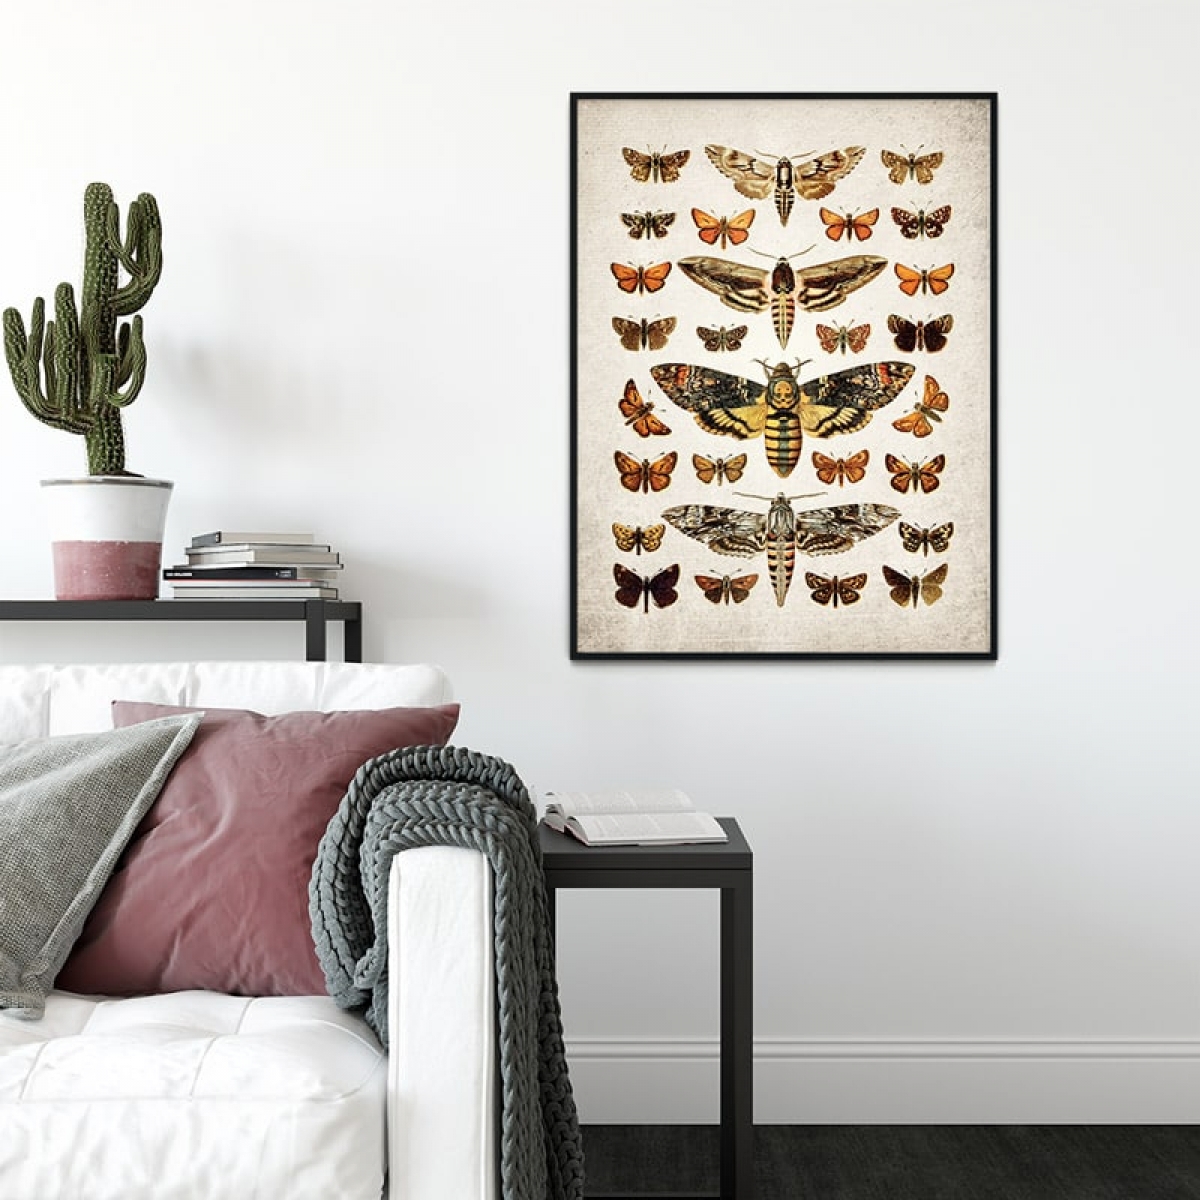 Vintage Entomology Giclee Print (Death's Head & Moths Plate From 1907)